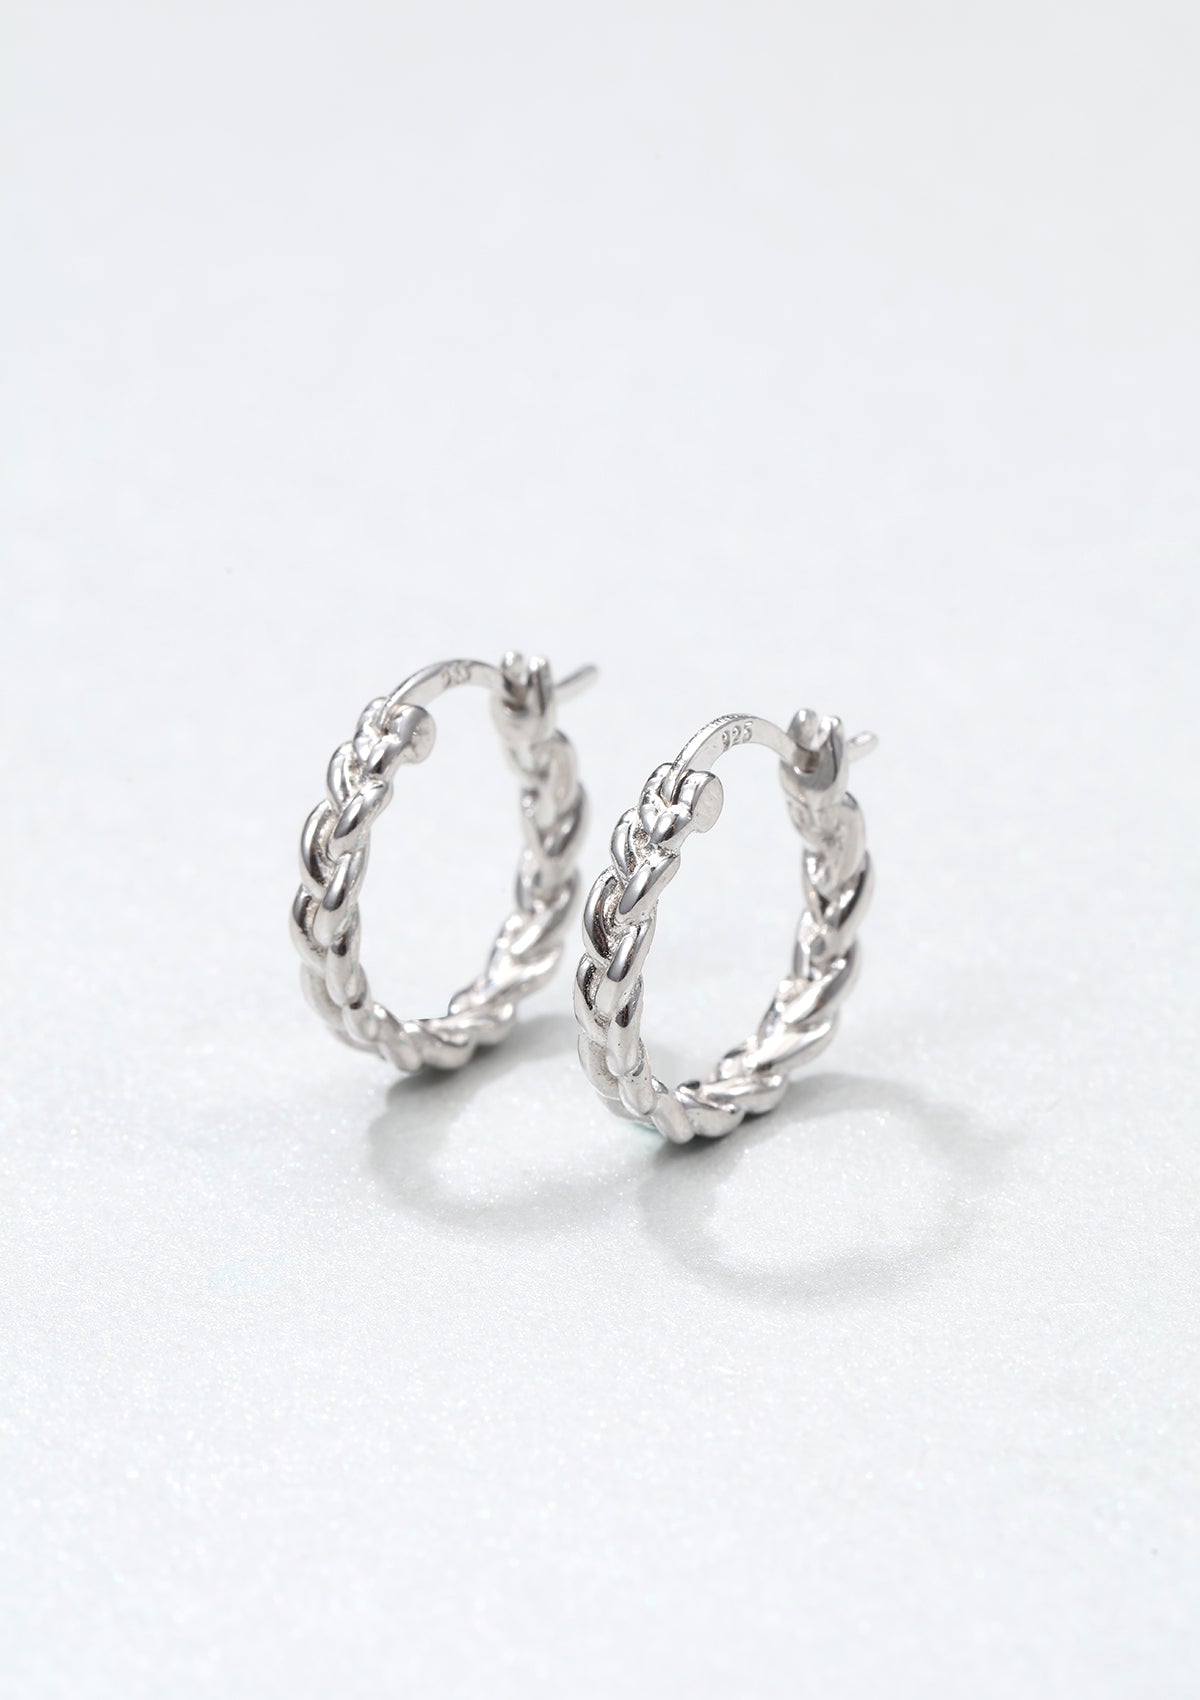 Gold/Silver Braided Hoop Earrings #3020 (PC) - YoungsGA.com : Beauty  Supply, Fashion, and Jewelry Wholesale Distributor